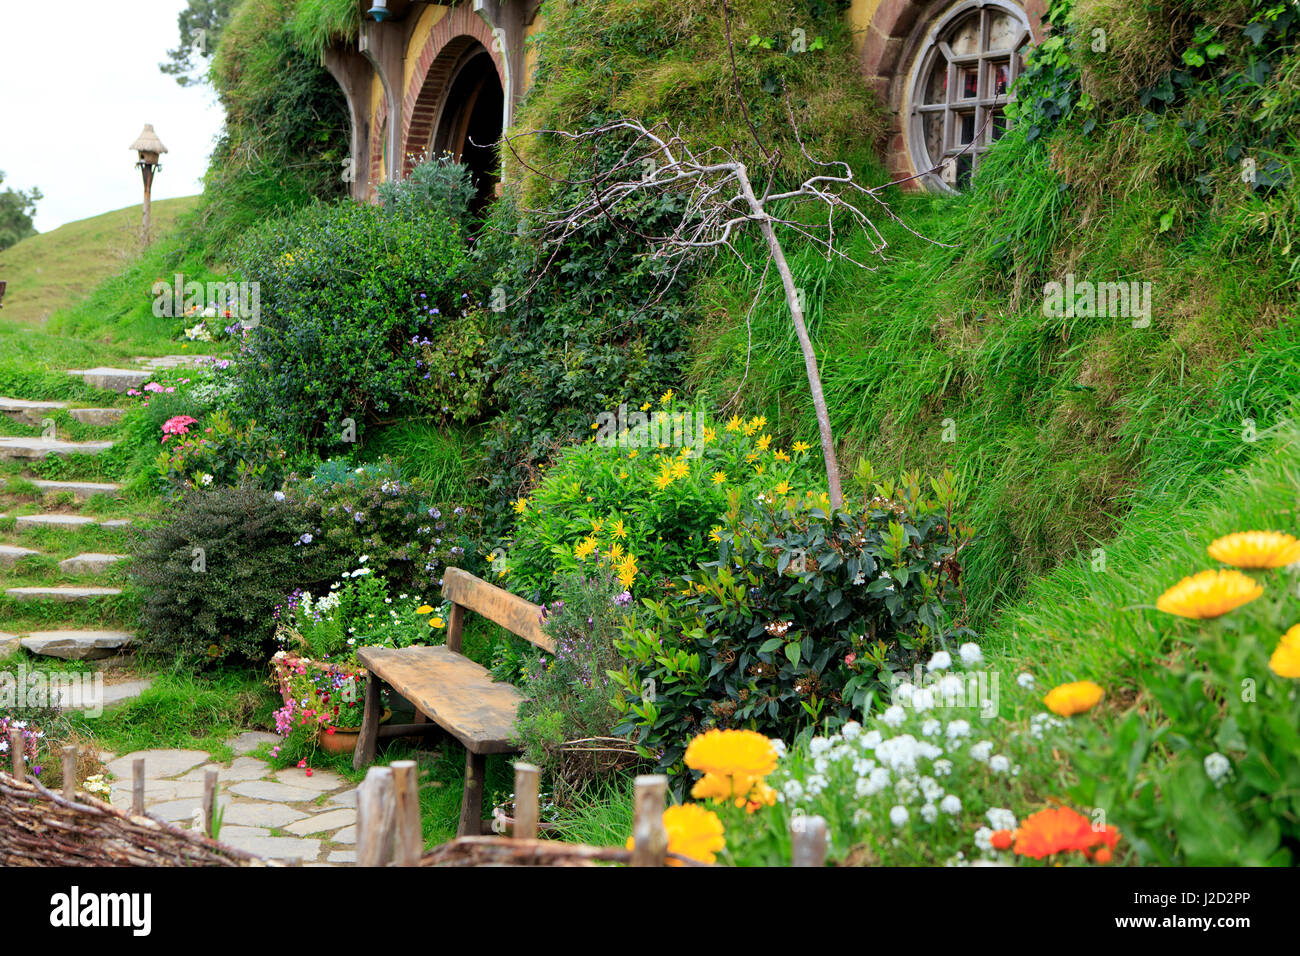 Hobbiton, near Matamata on the north island of New Zealand, is the movie set used in the movie series 'Lord of the Rings' and 'The Hobbit'. This particular house is known as Bag End and is the home of the movie's protagonist-Bilbo Baggins. Stock Photo